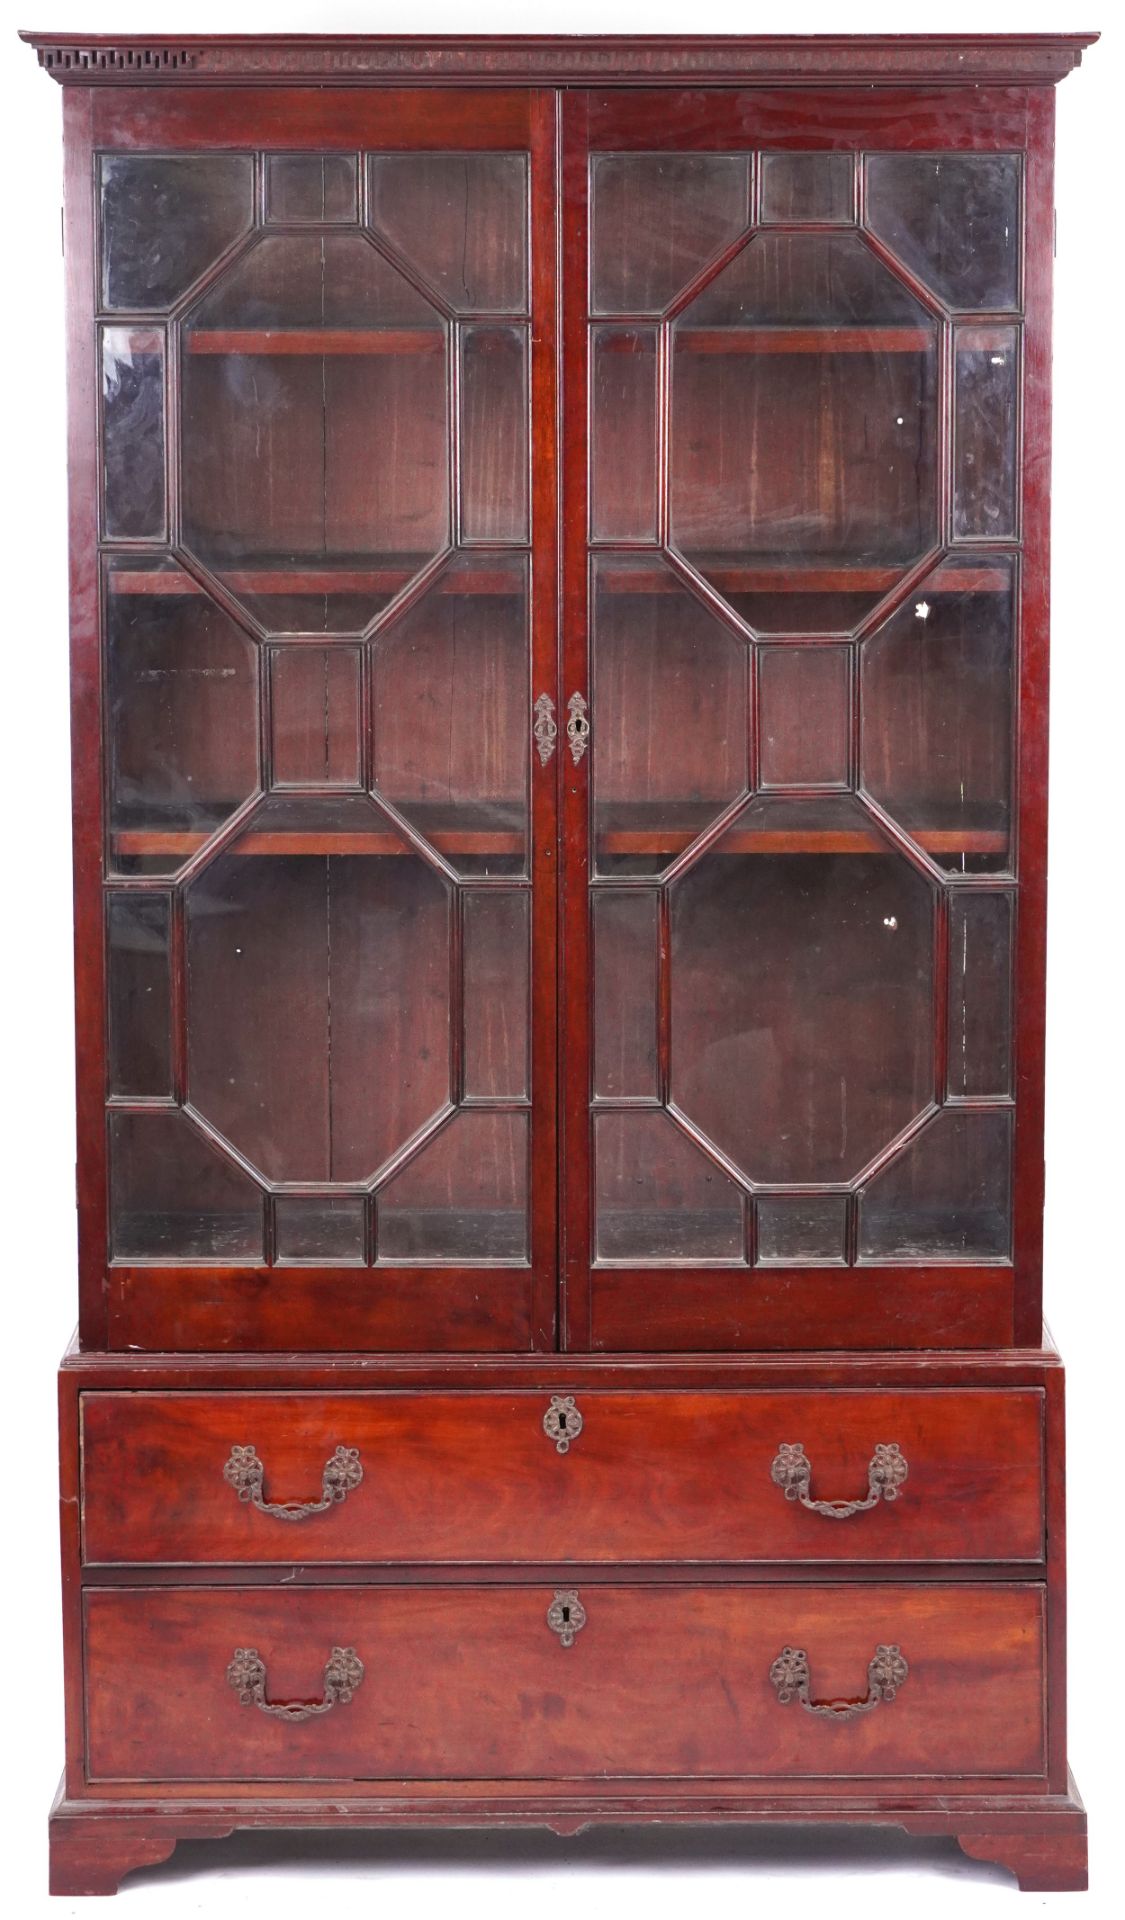 Georgian style mahogany bookcase on stand with a pair of astragal glazed doors enclosing four